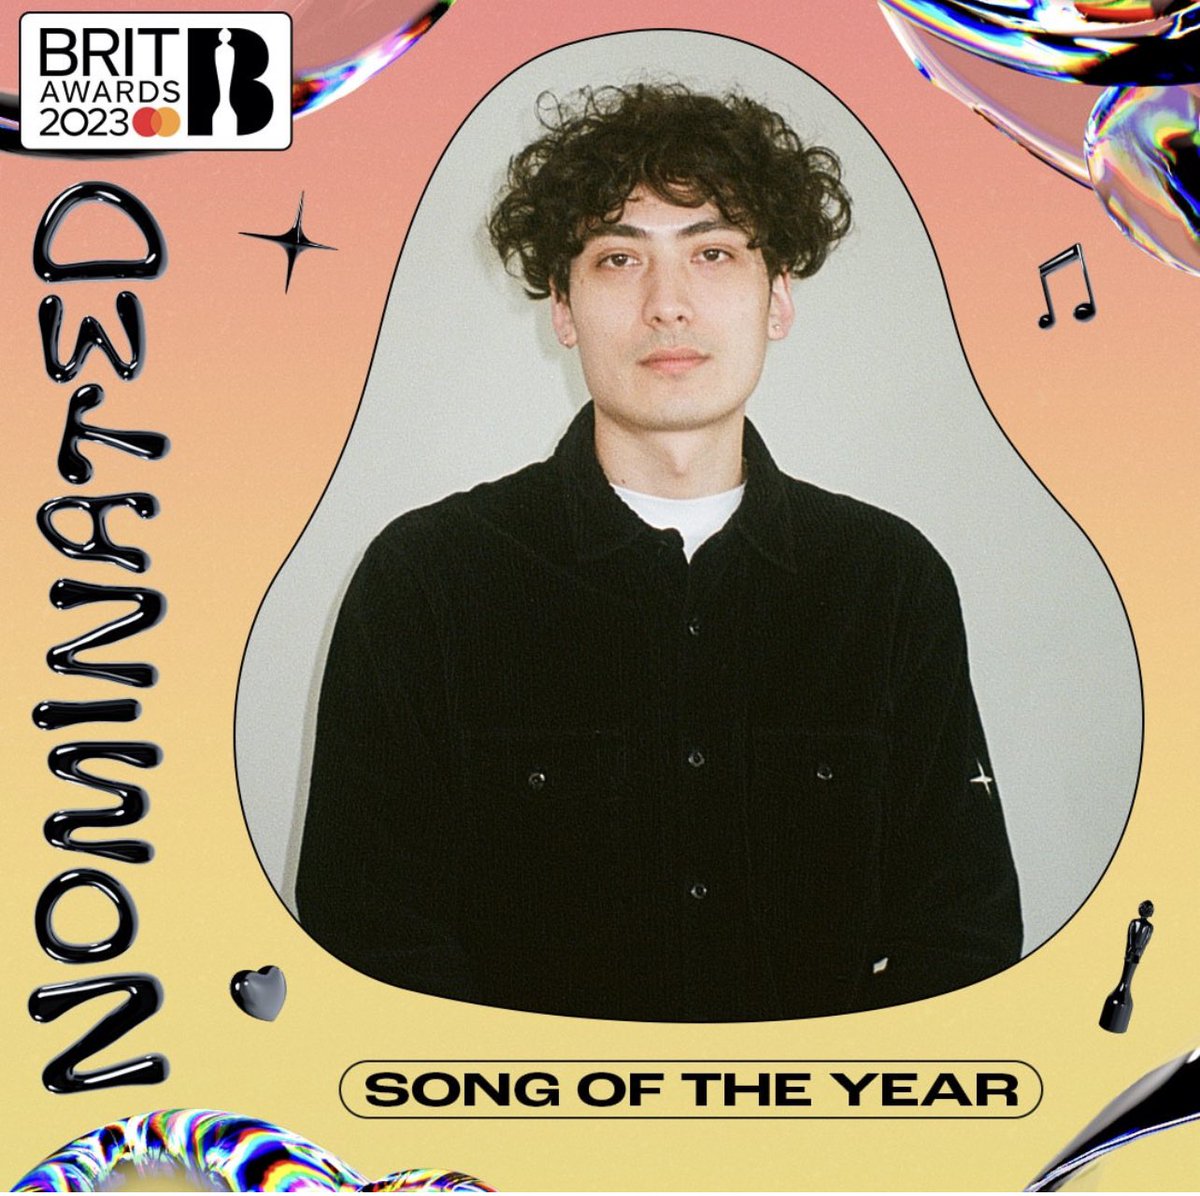 Congrats our kid on your first @BRITs nomination.